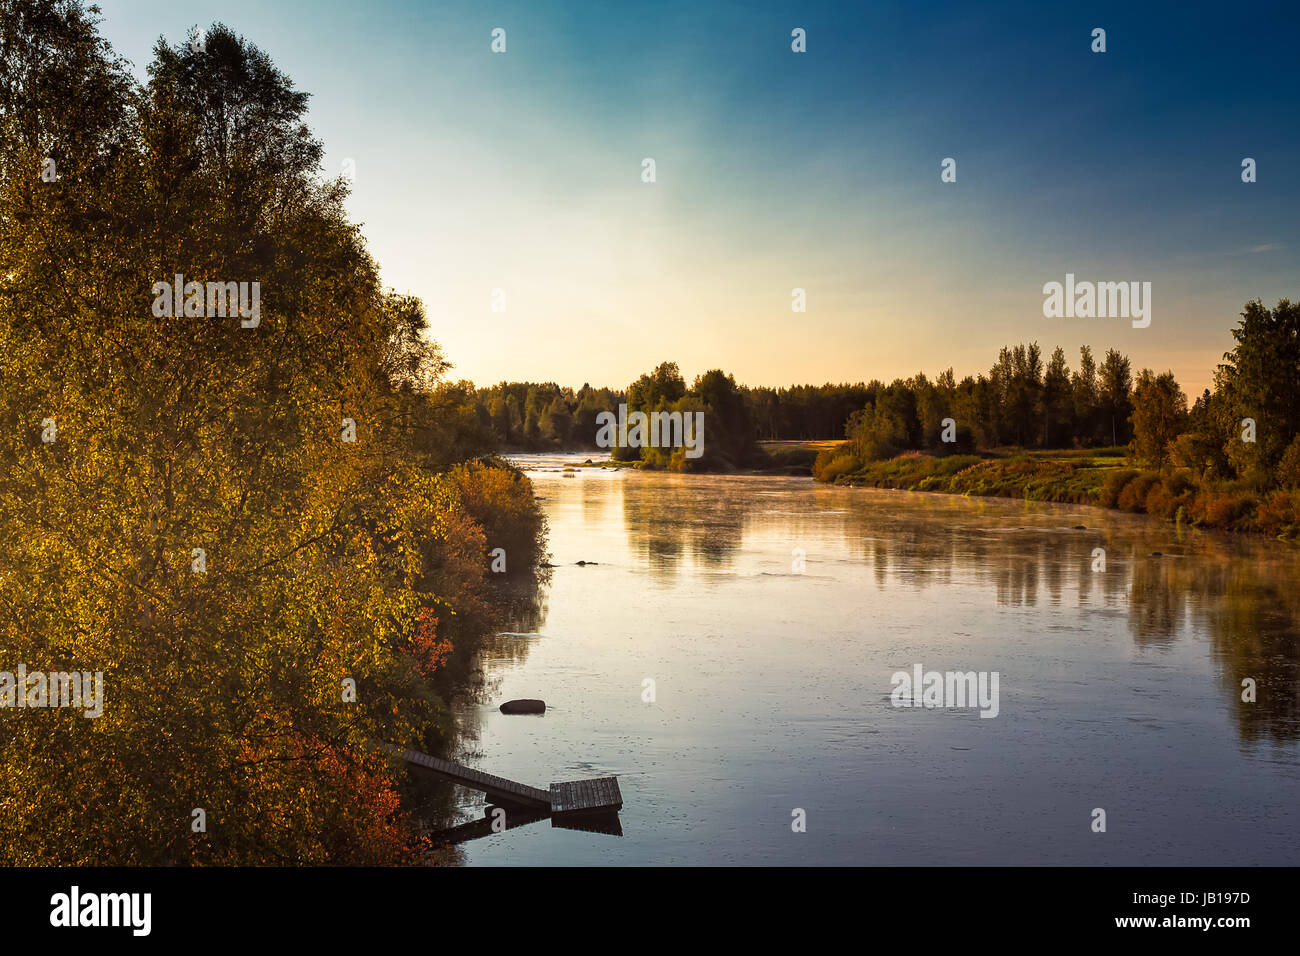 A beautiful but cold morning by the river Pyhajoki in the Northern Finland. The autumn is here and the leaves are colored beautifully. Stock Photo